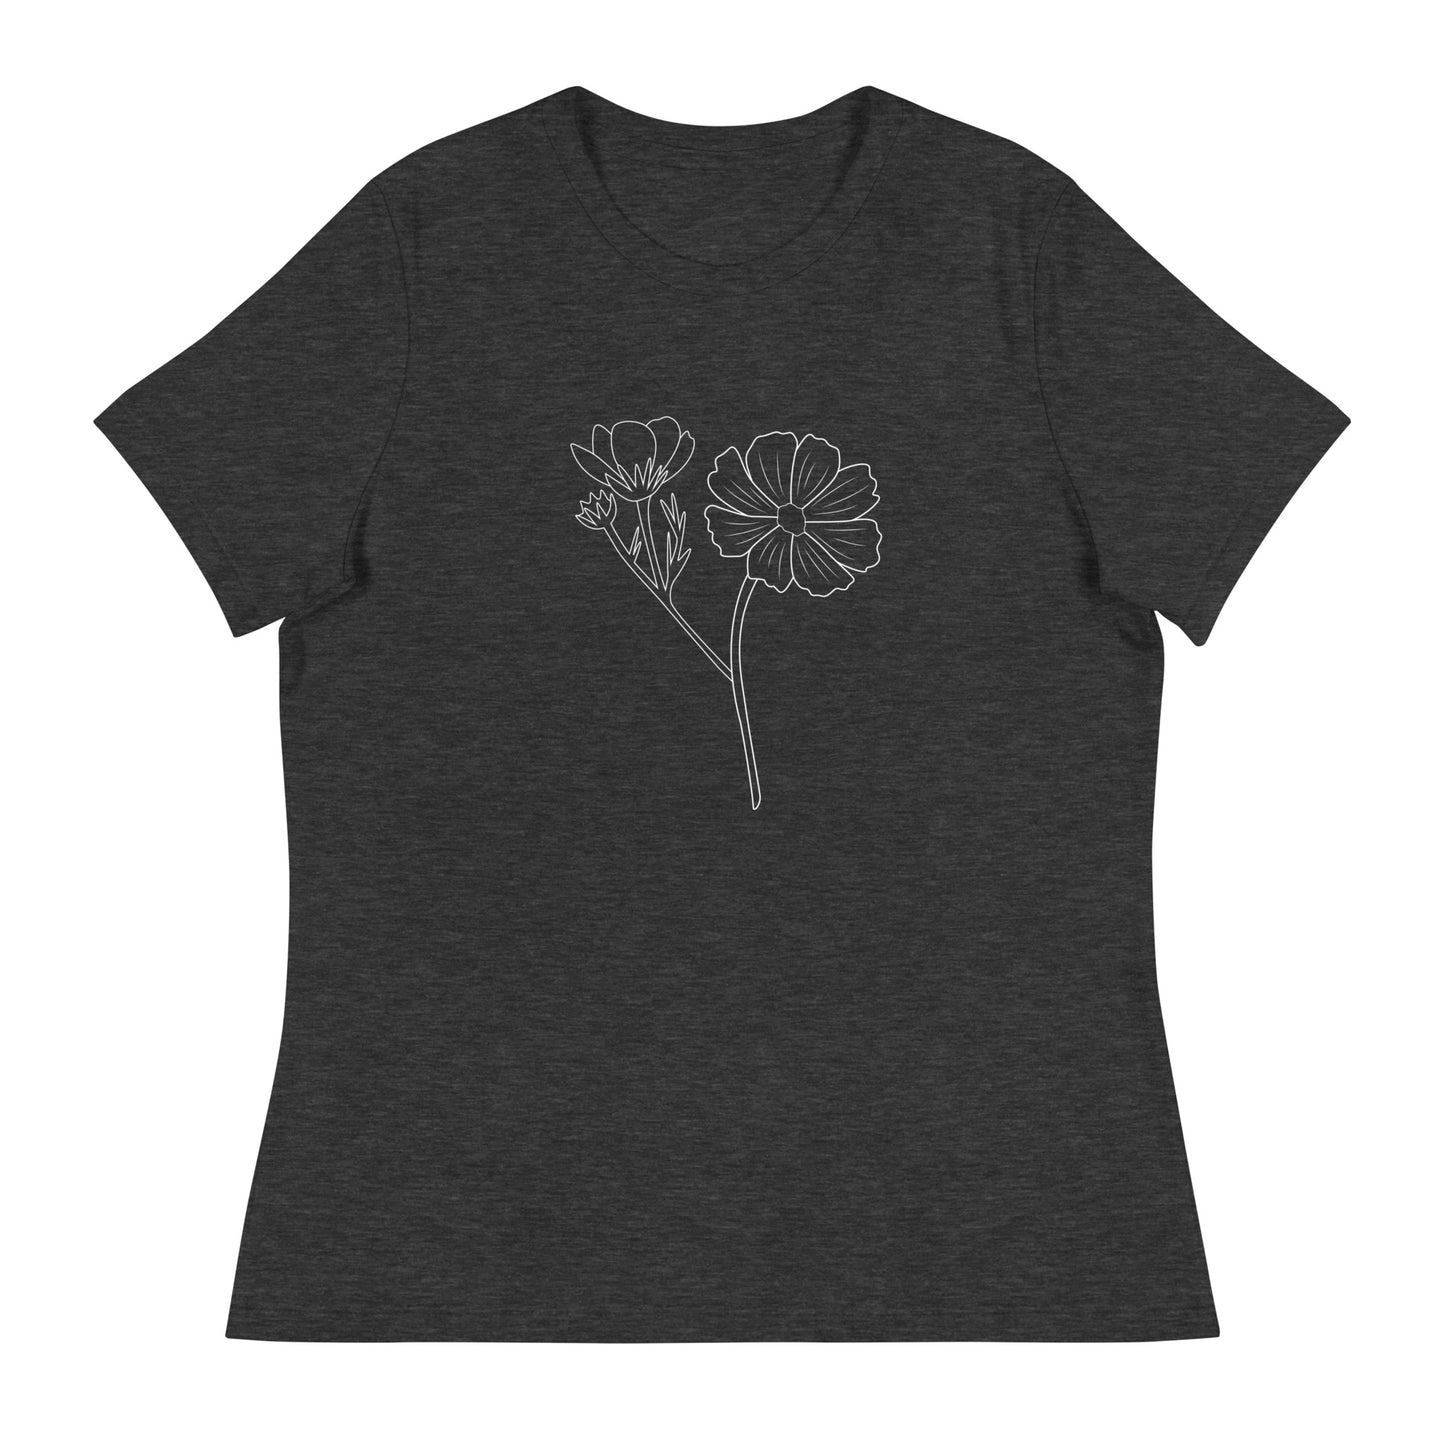 Cosmos Women's Relaxed T-Shirt